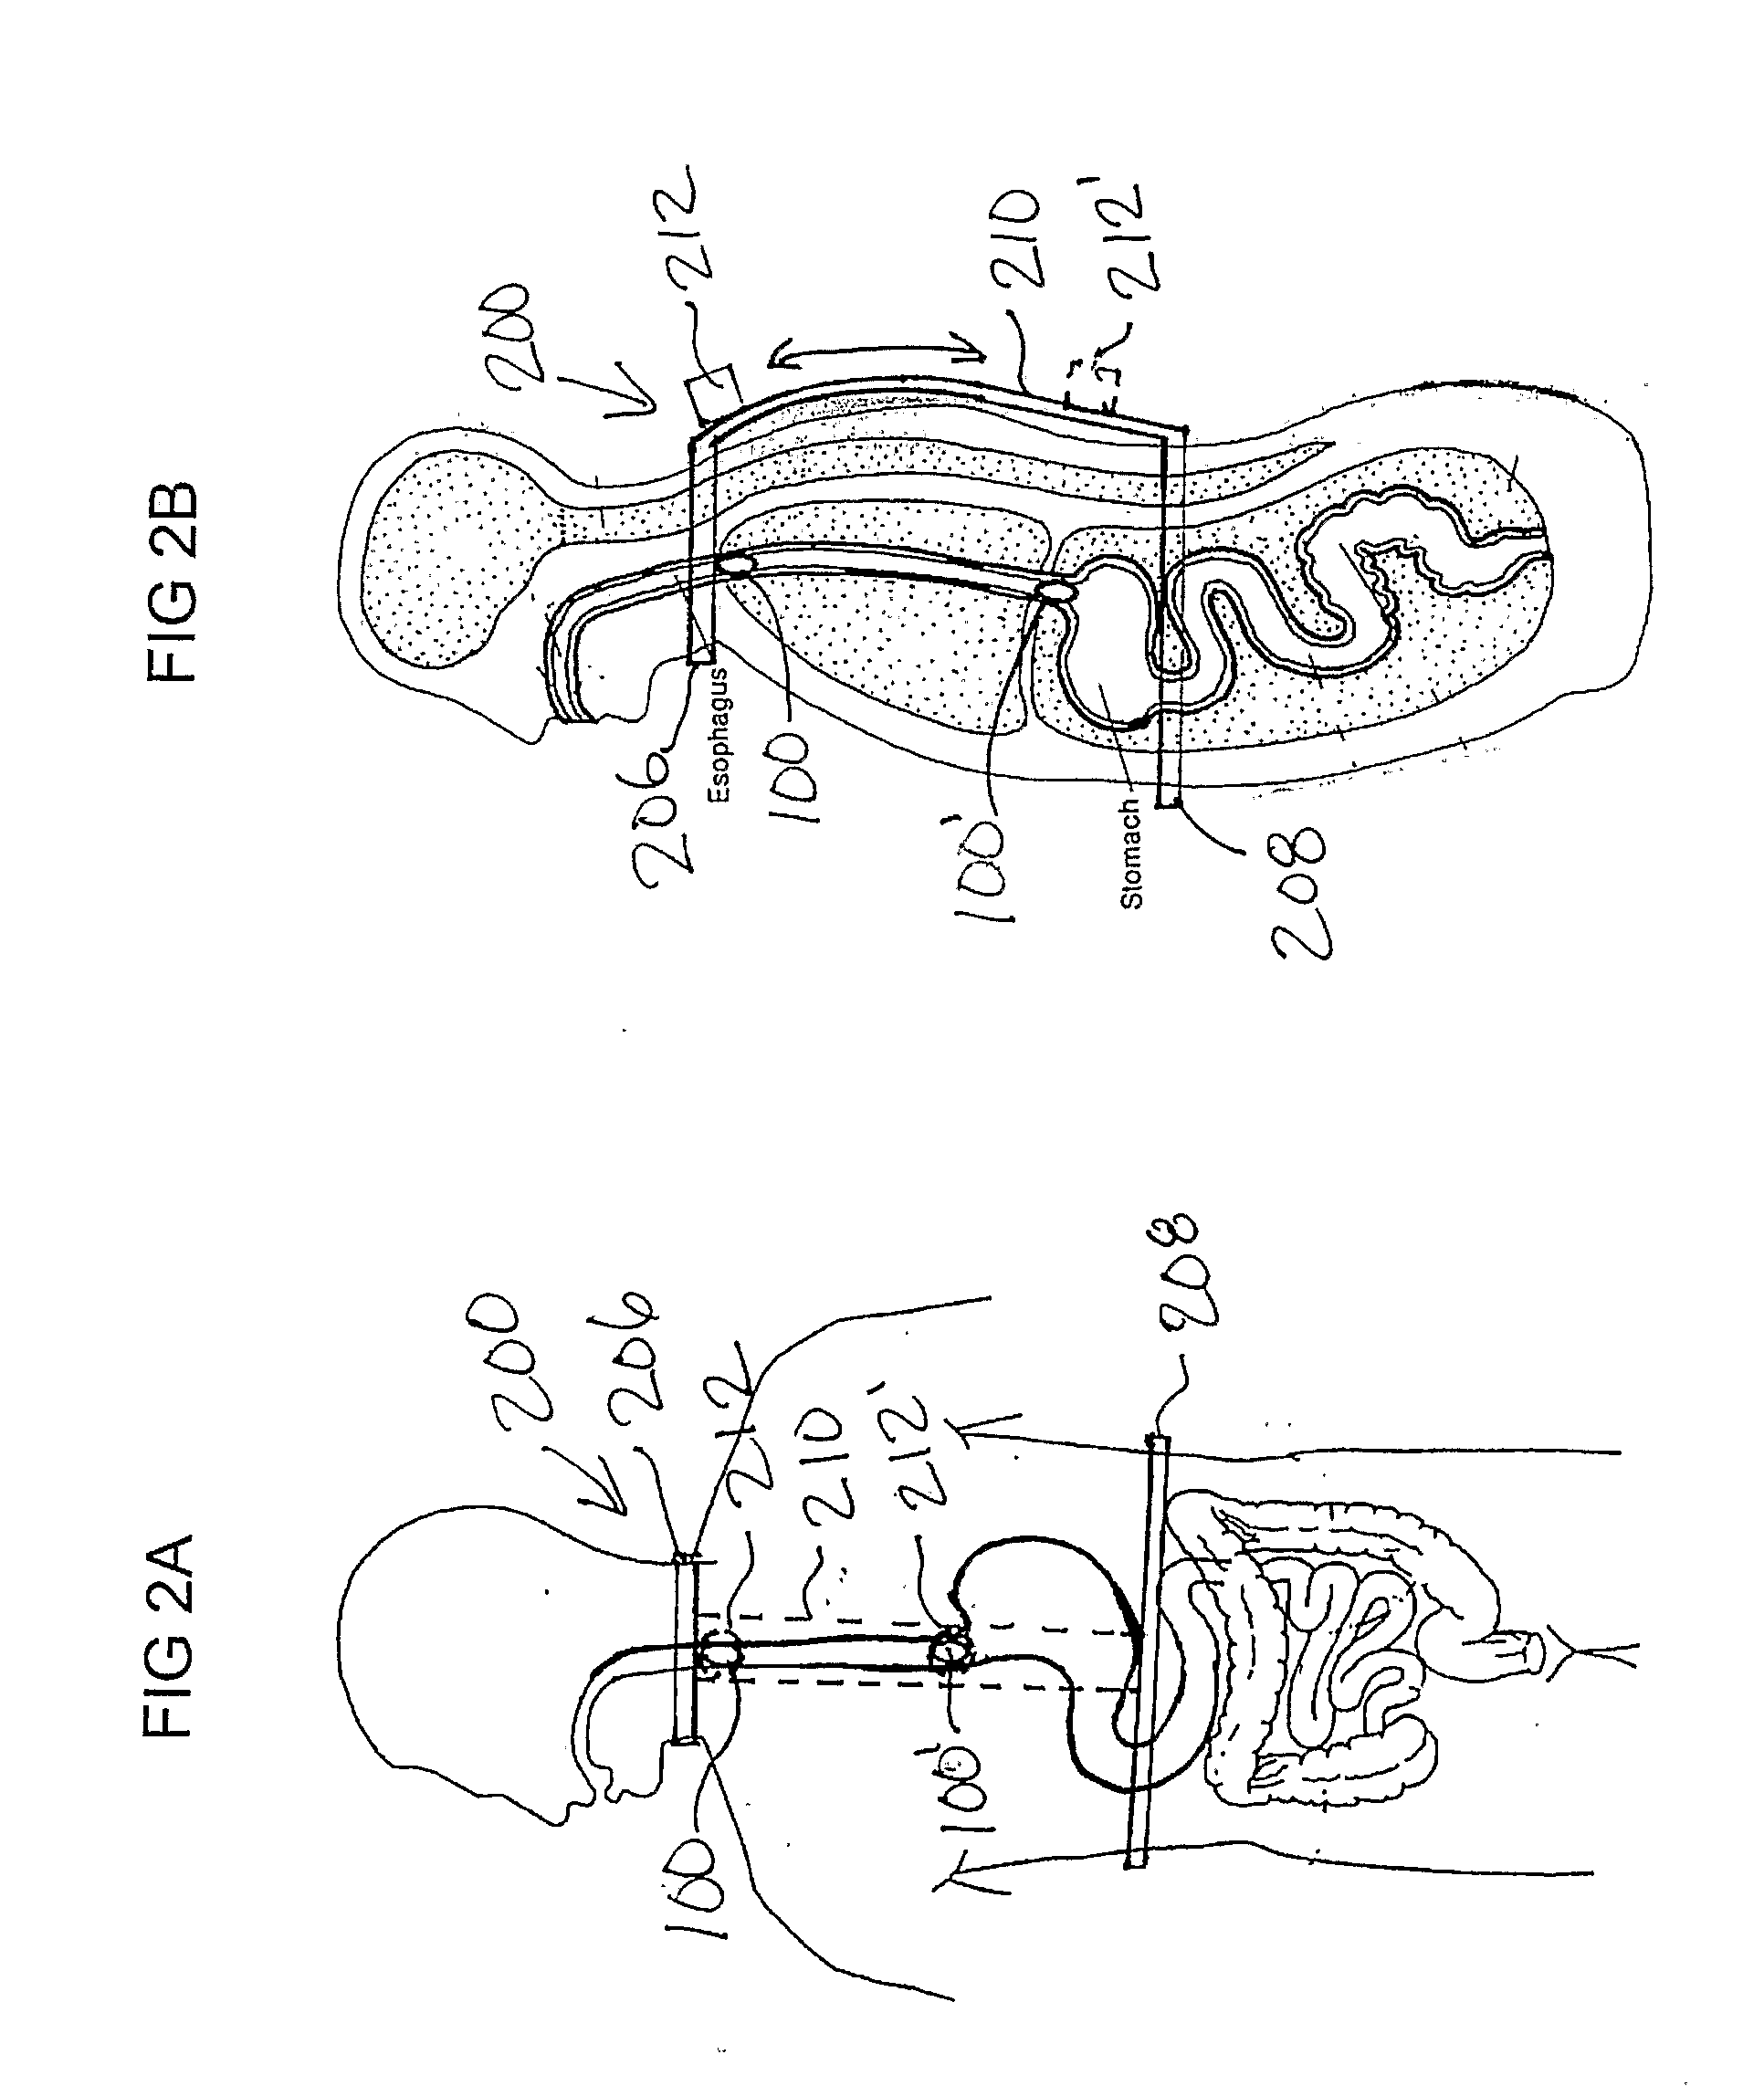 Apparatus and Methods for Capsule Endoscopy of the Esophagus